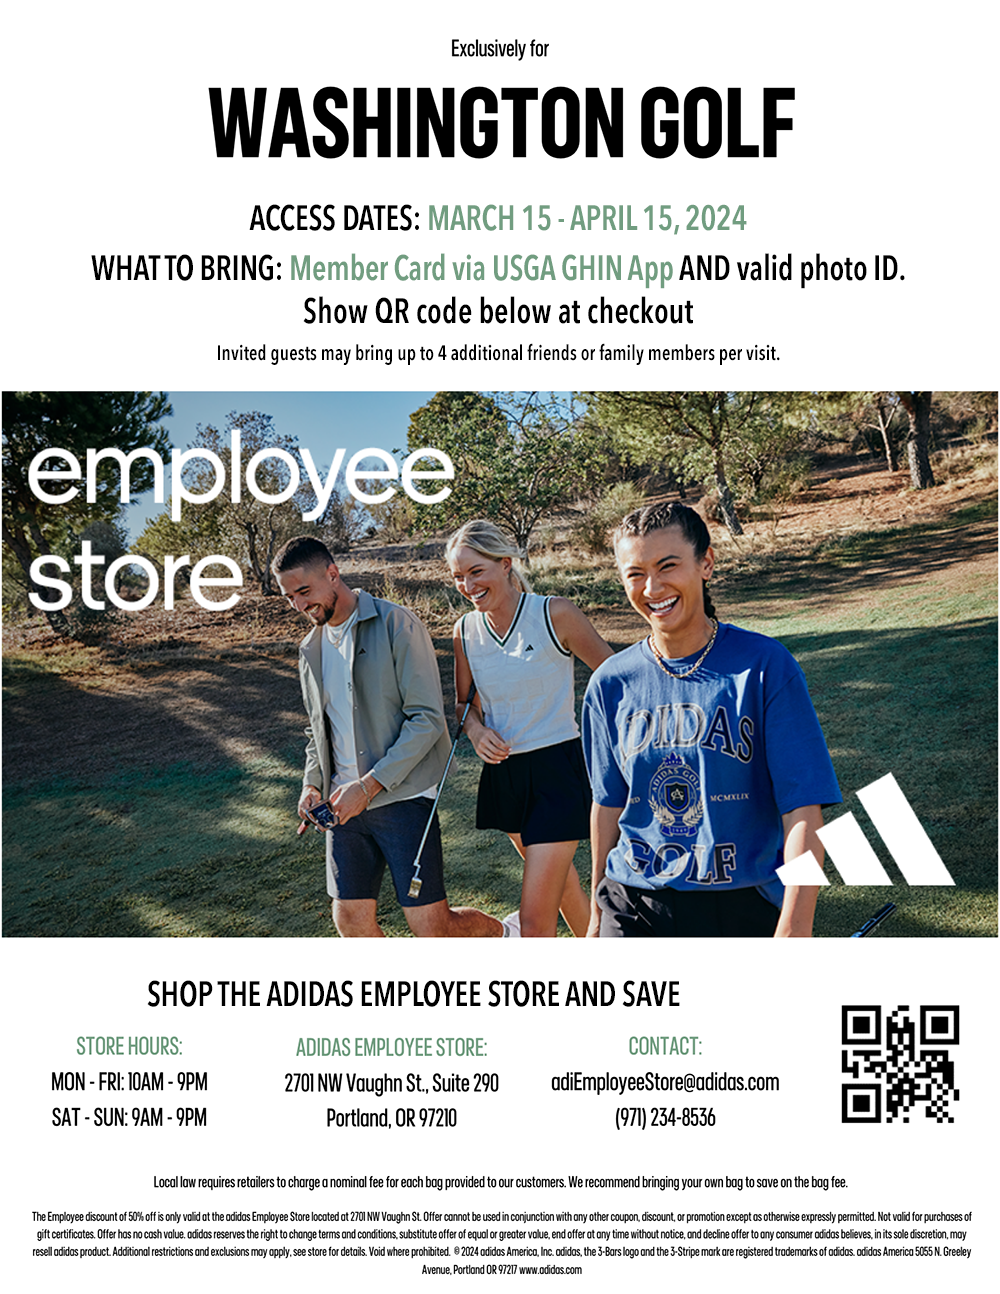 adidas Employee Store Access March 15 - April 15, 2024